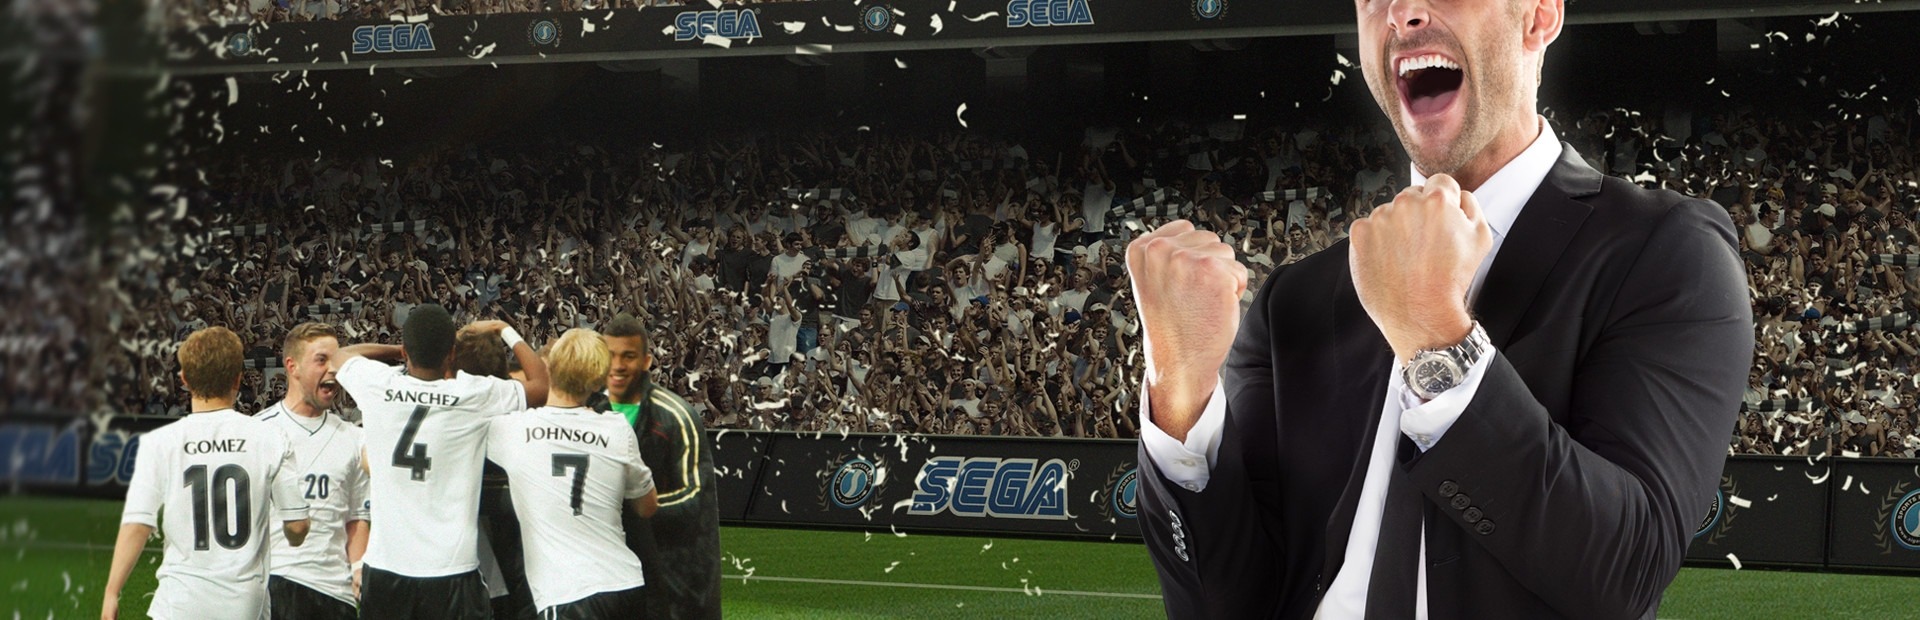 Banner Football Manager 2013